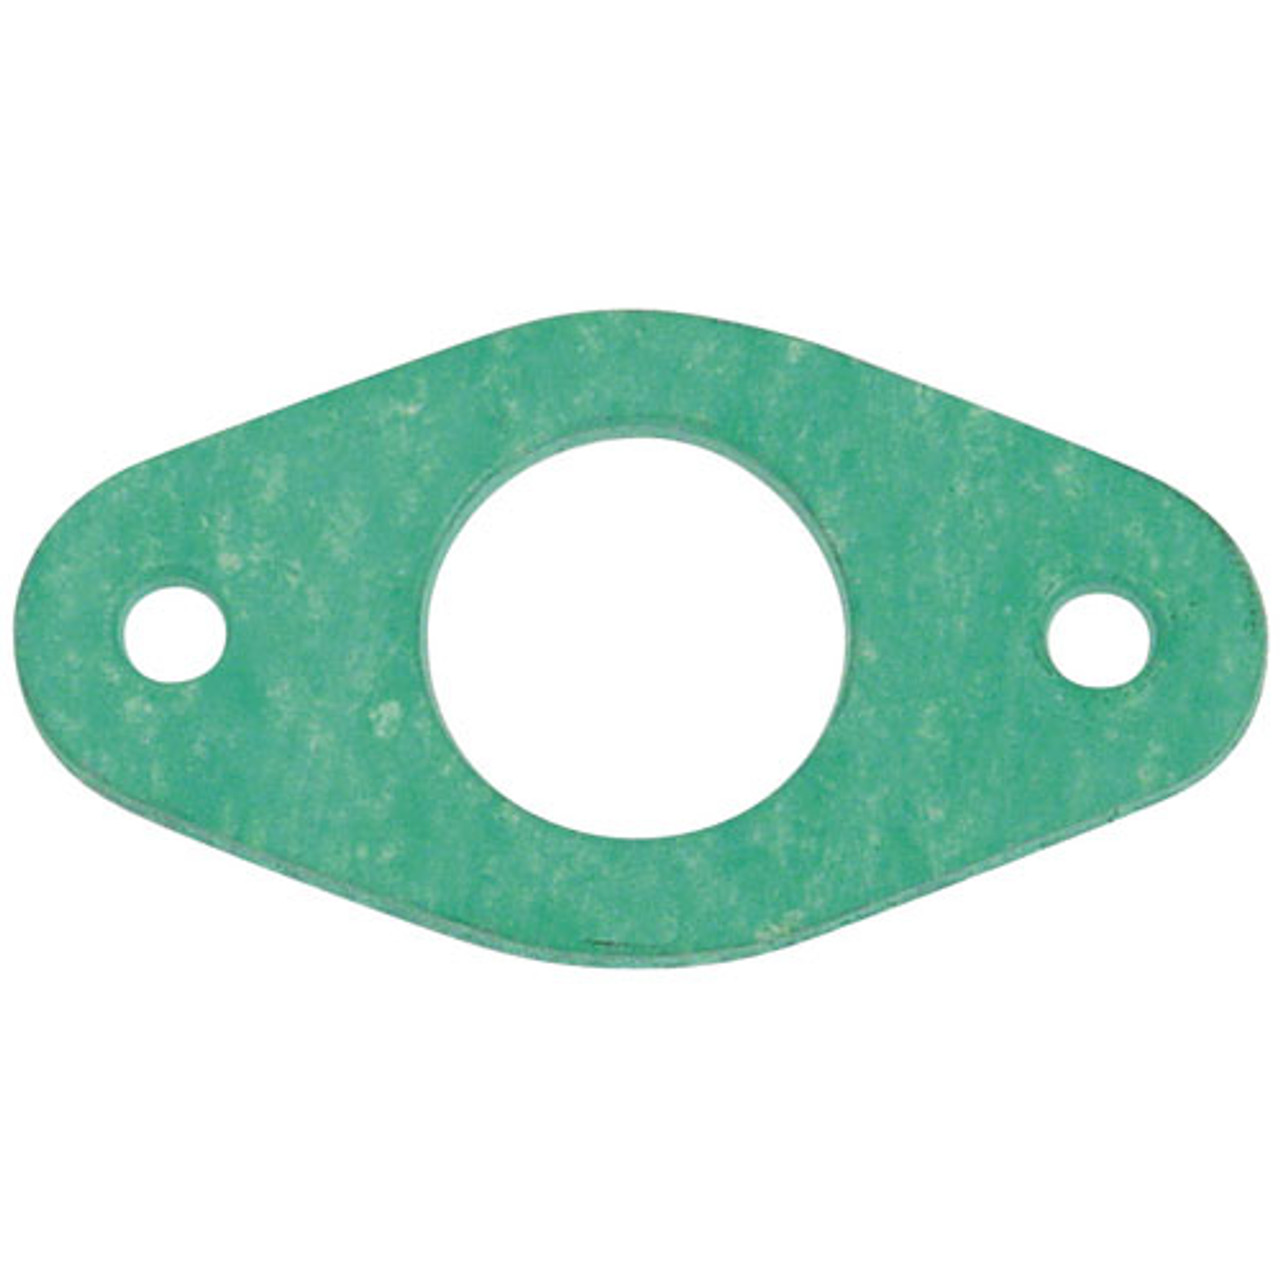 Burner Gasket 2-11/16" X 1-1/2" - Replacement Part For Randell RDHP-09